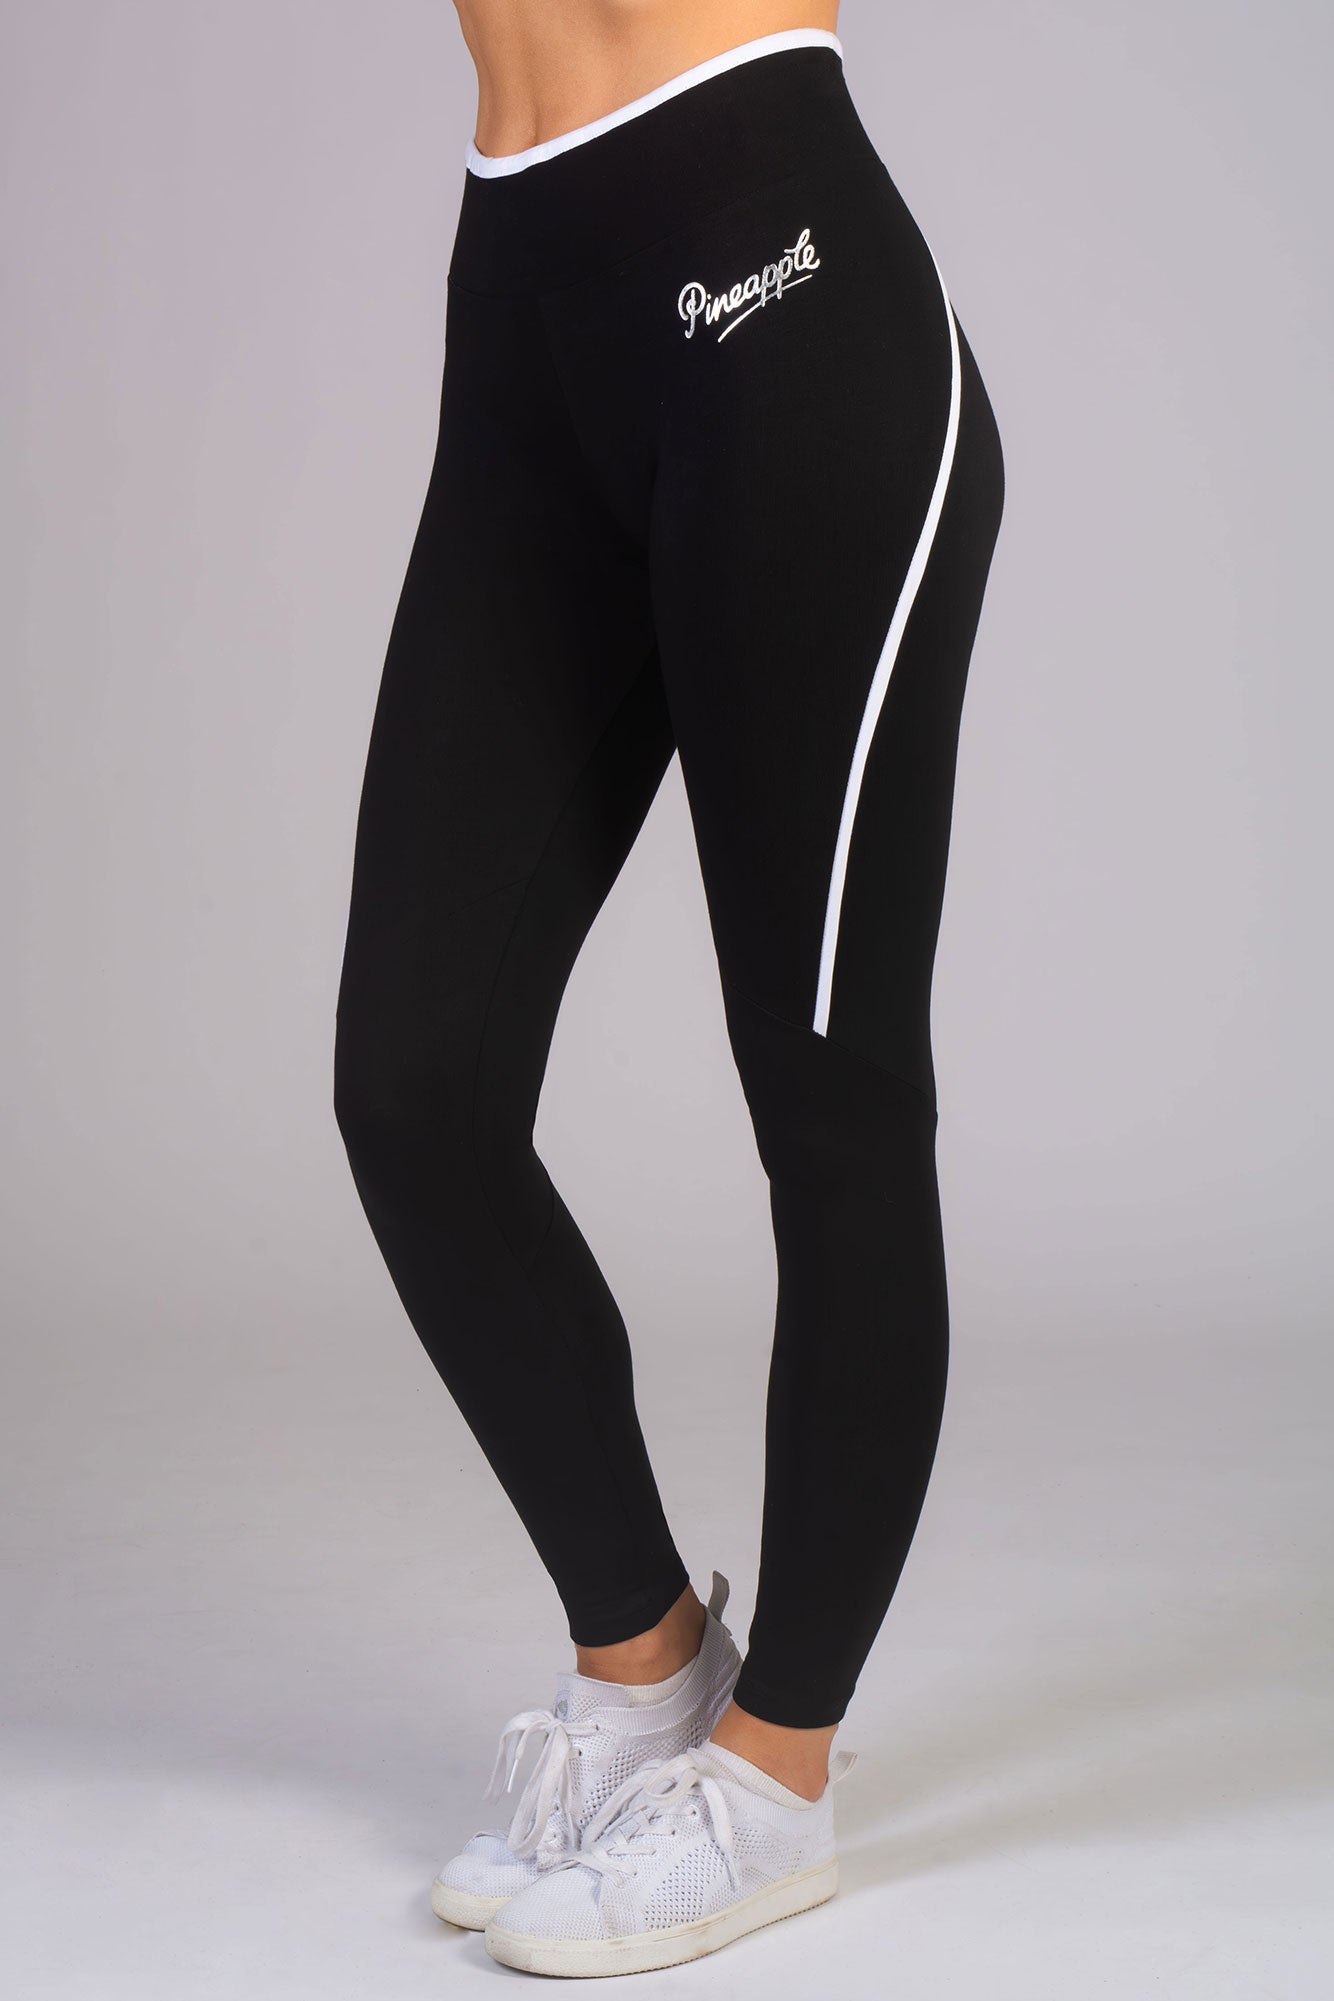 Active Life black with white stripe & mesh cropped Leggings Women's Size M  for sale online